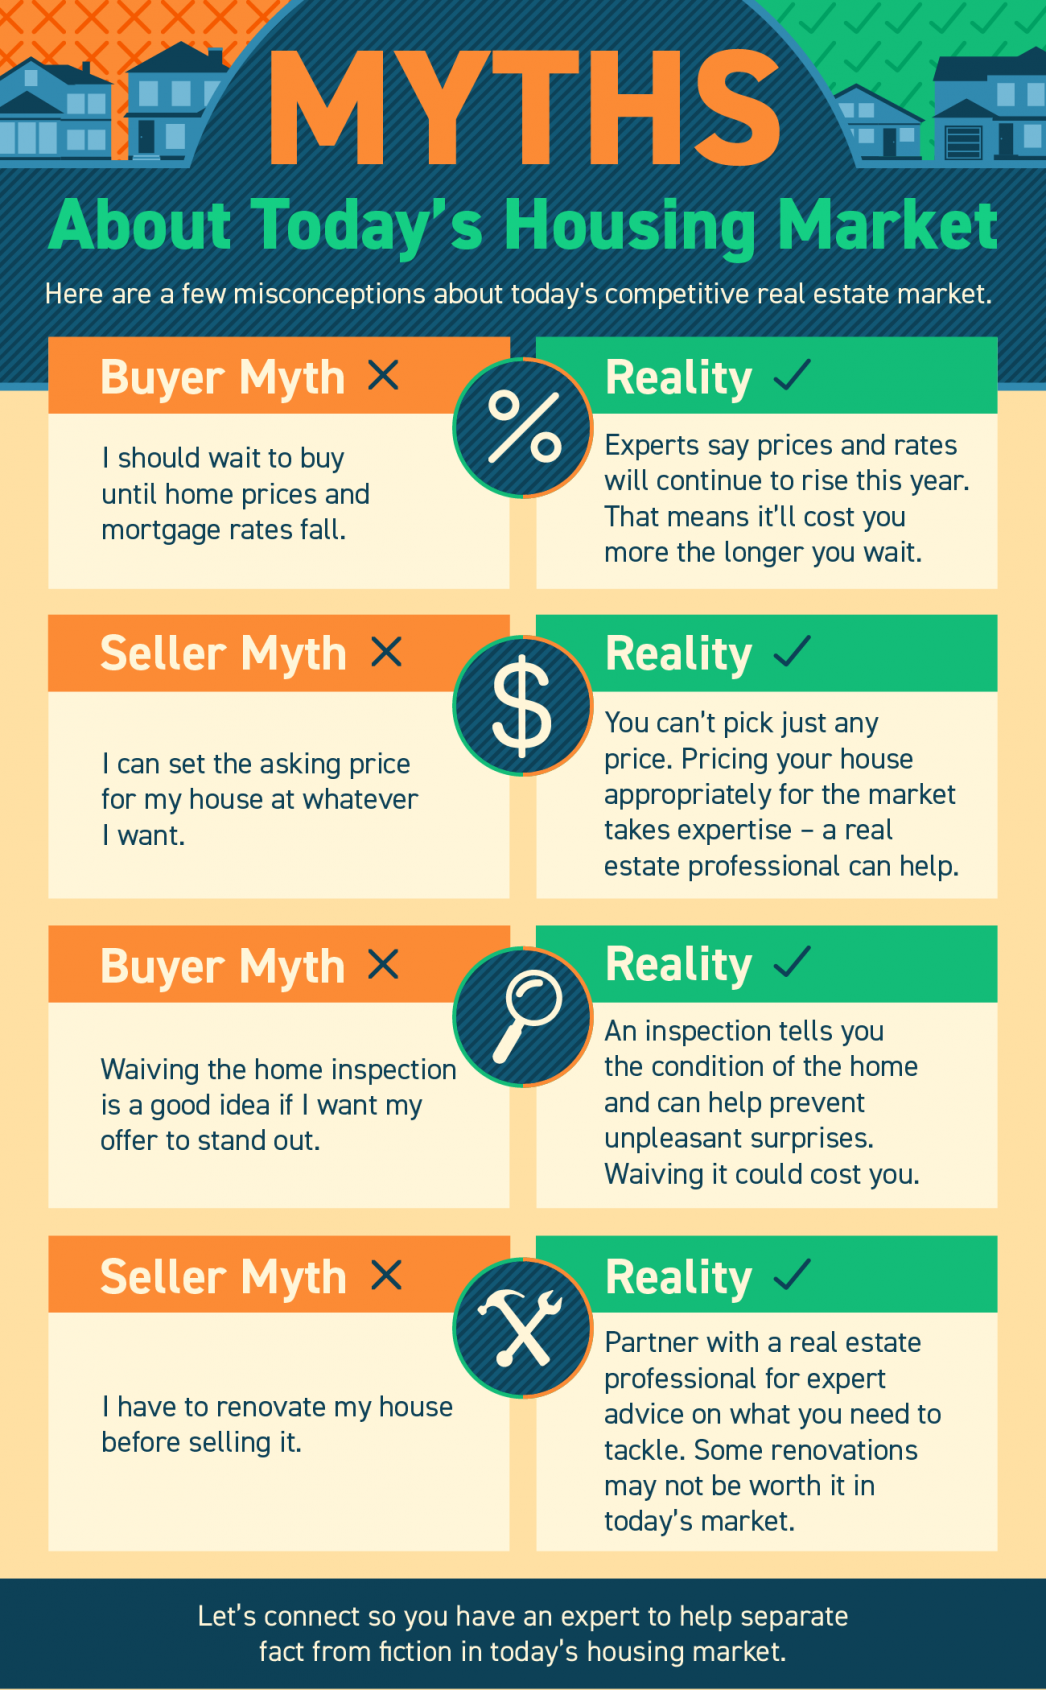 MYTHS About Today's Housing Market